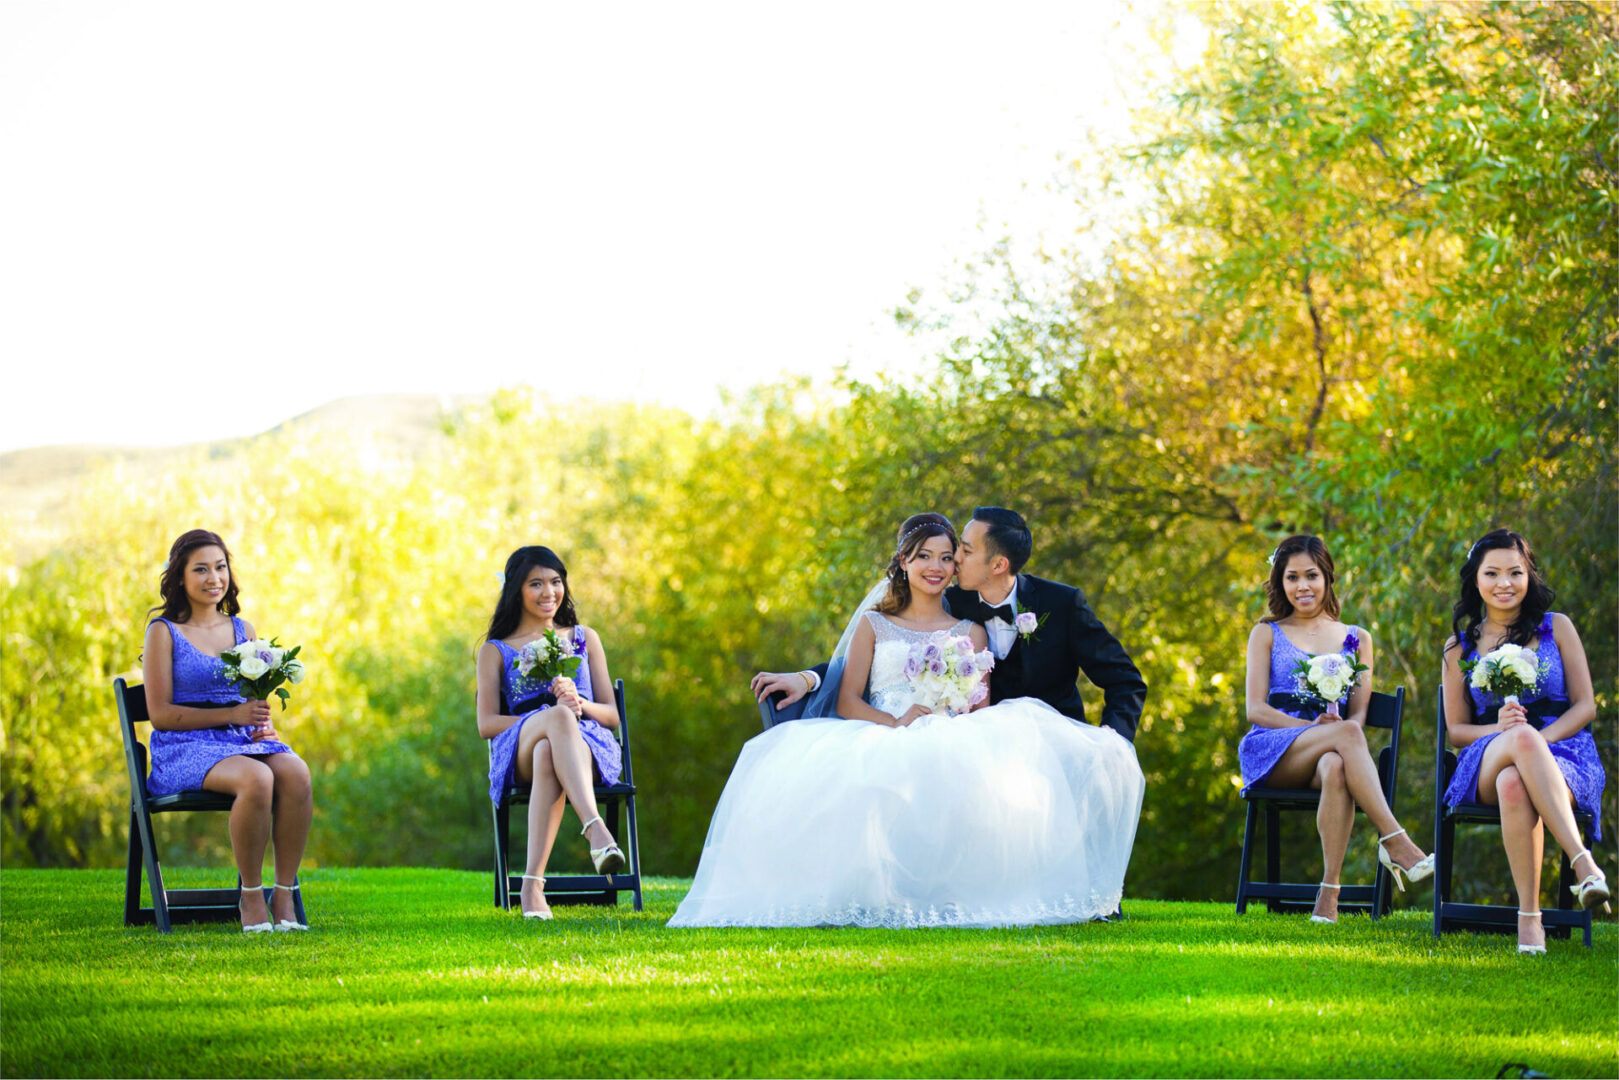 A couple kissing in a field along with girls sitting on the chair